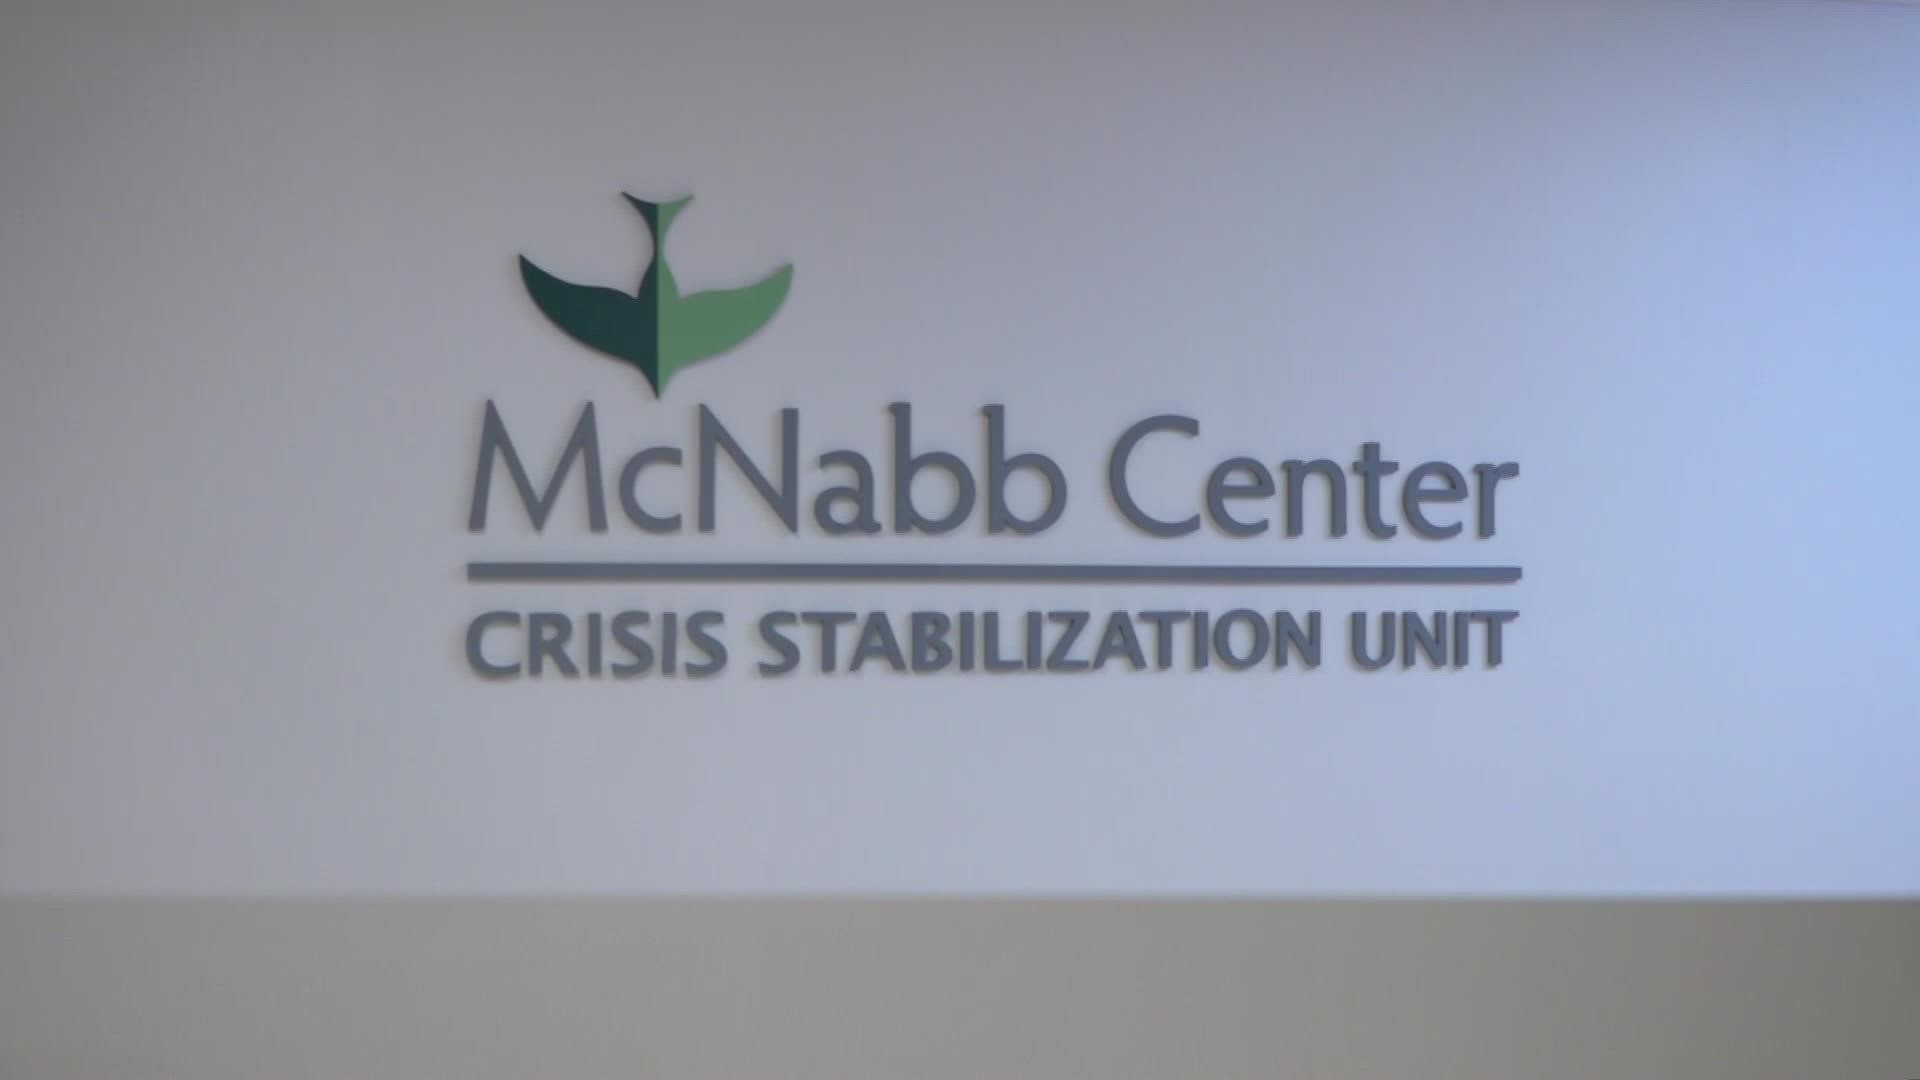 The Crisis Stabilization Unit at East Tennessee Children's Hospital is up and running and helping a lot of children.